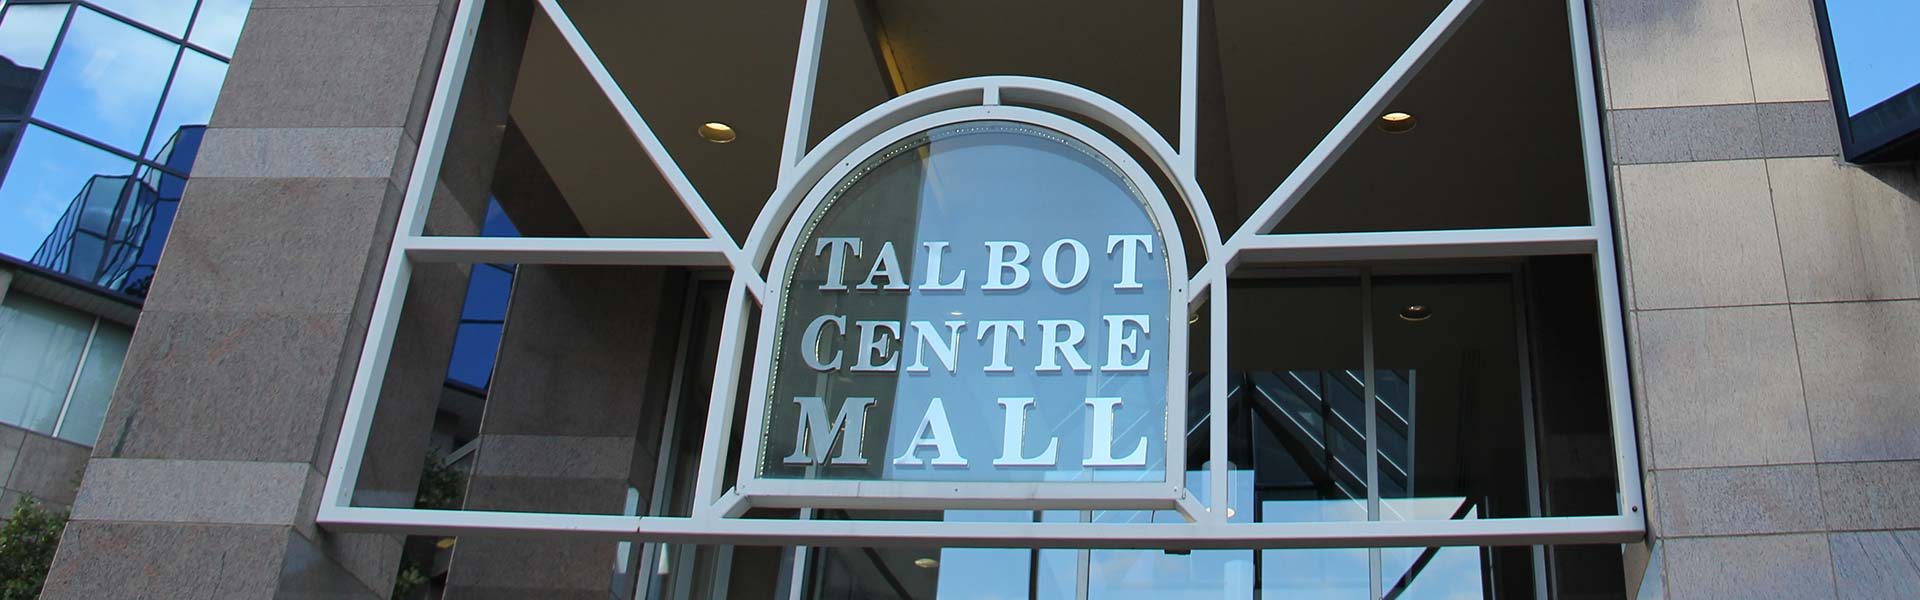 Entrance to Talbot Centre Mall